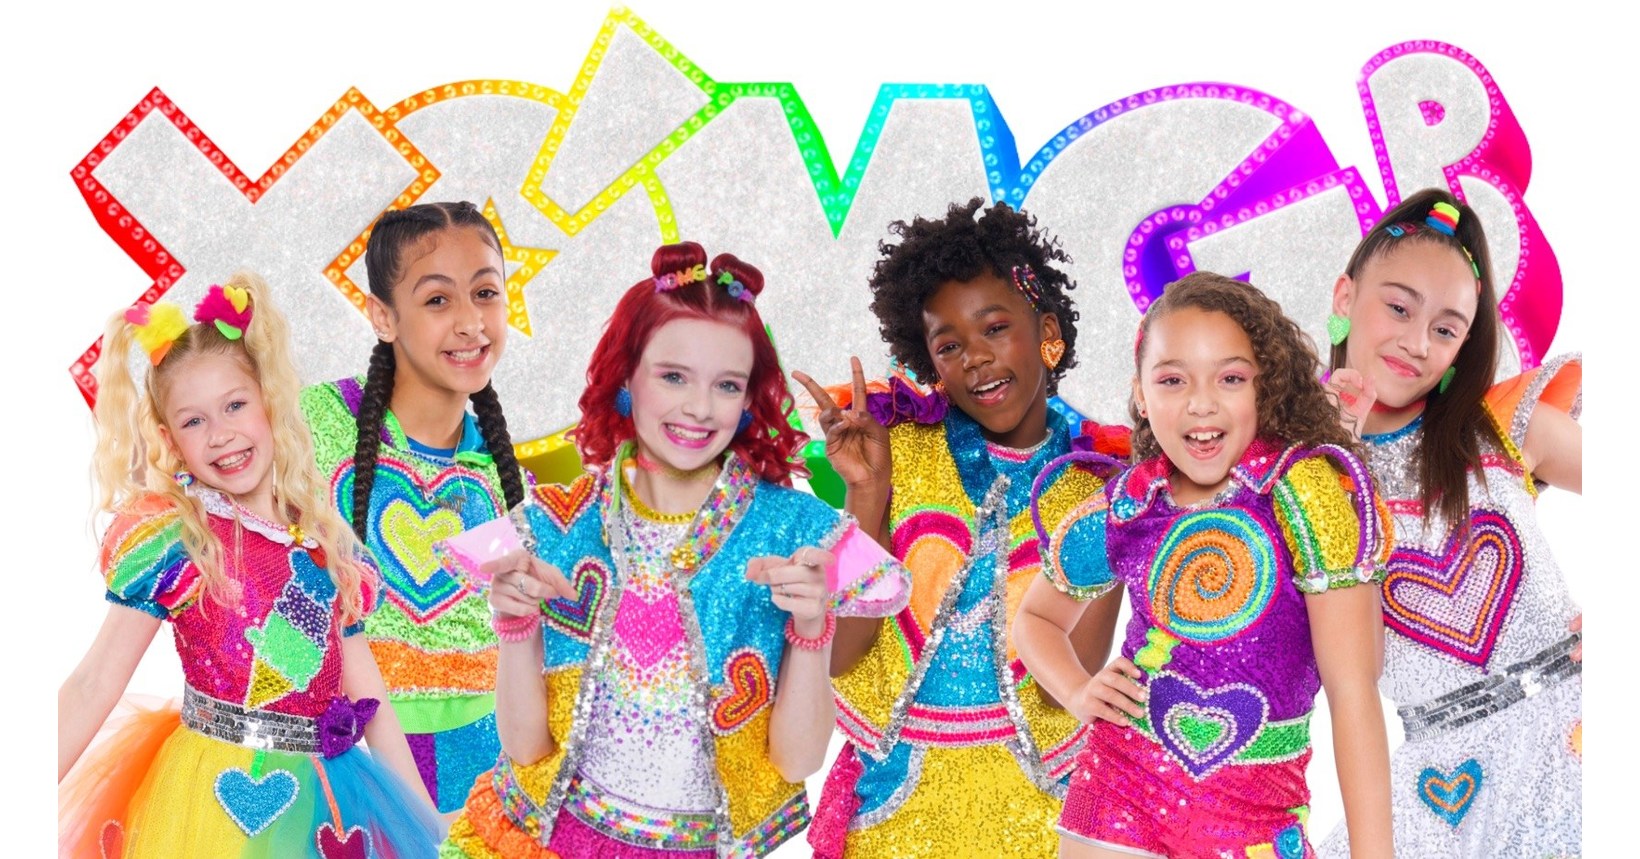 THOMAS GLOBAL MEDIA, LLC Announces the First Wave of Major Licensing Deals for JESS and JOJO SIWA'S New Girl Group XOMG POP!